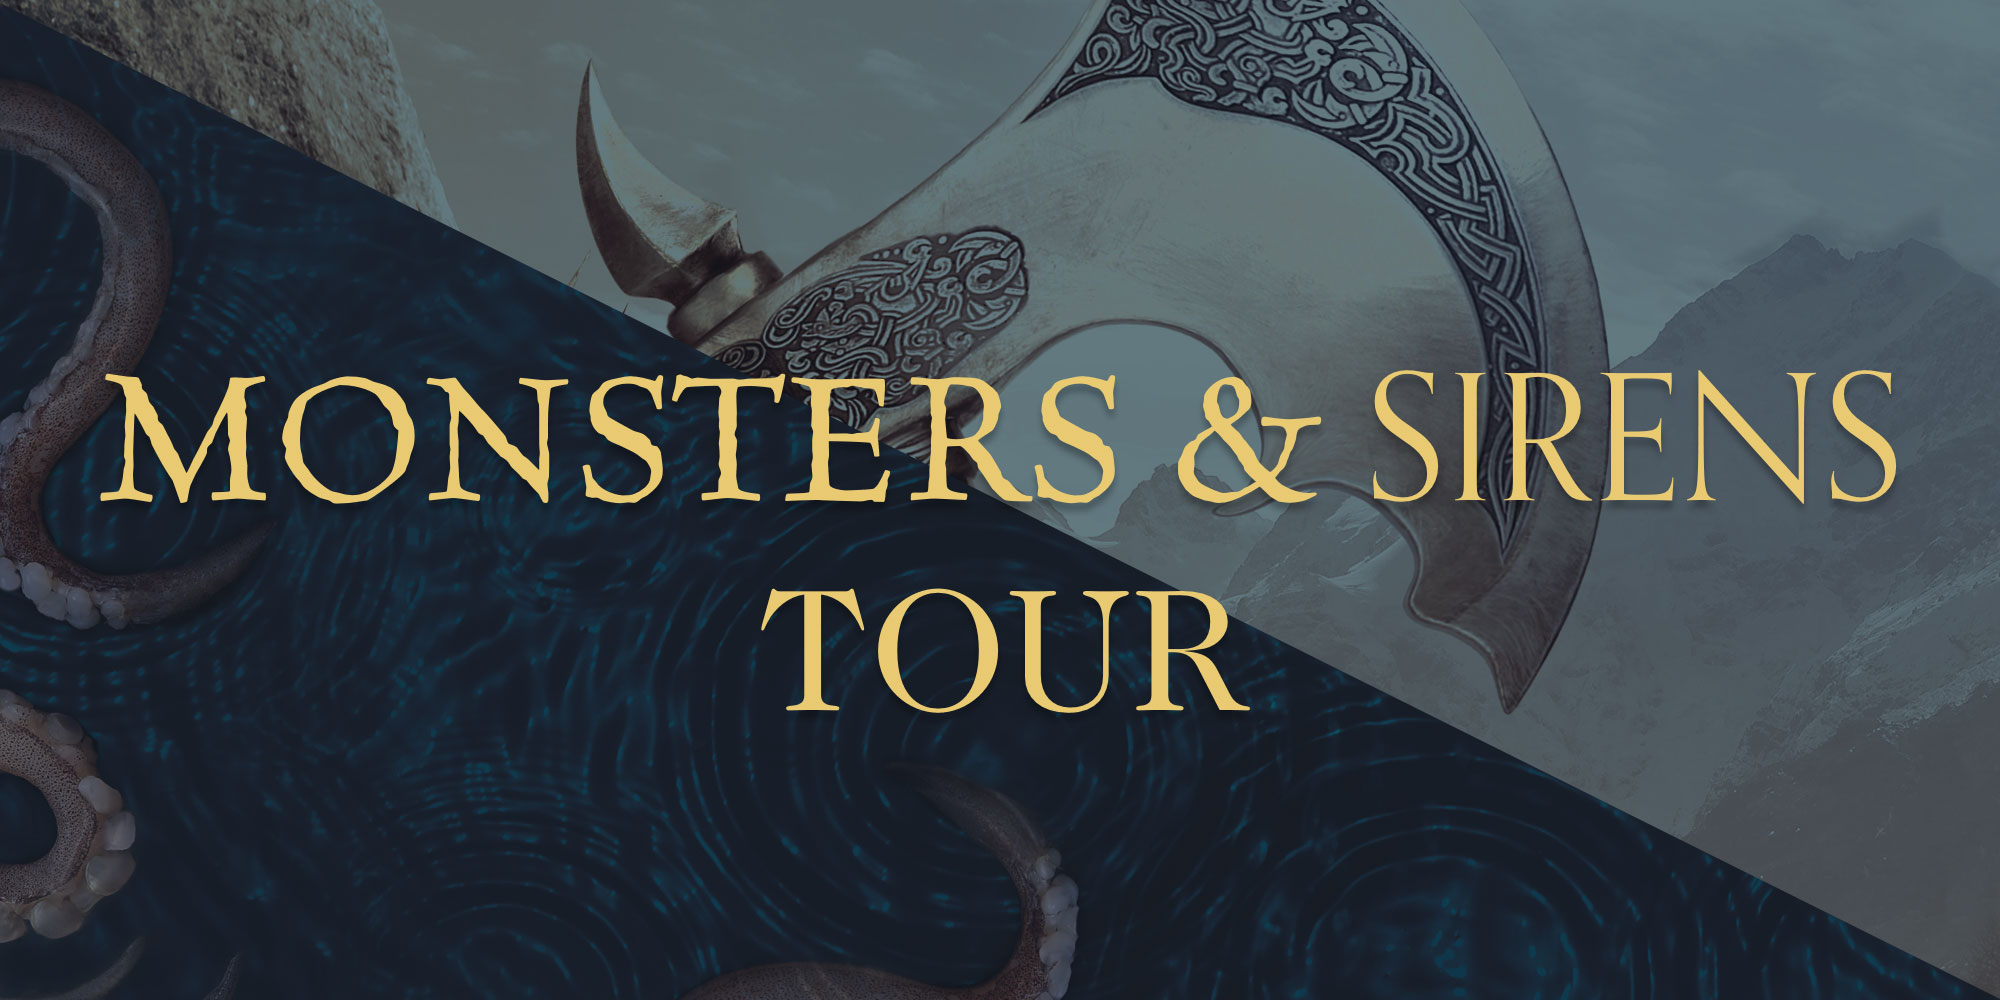 Announcing the Monsters and Sirens Tour!